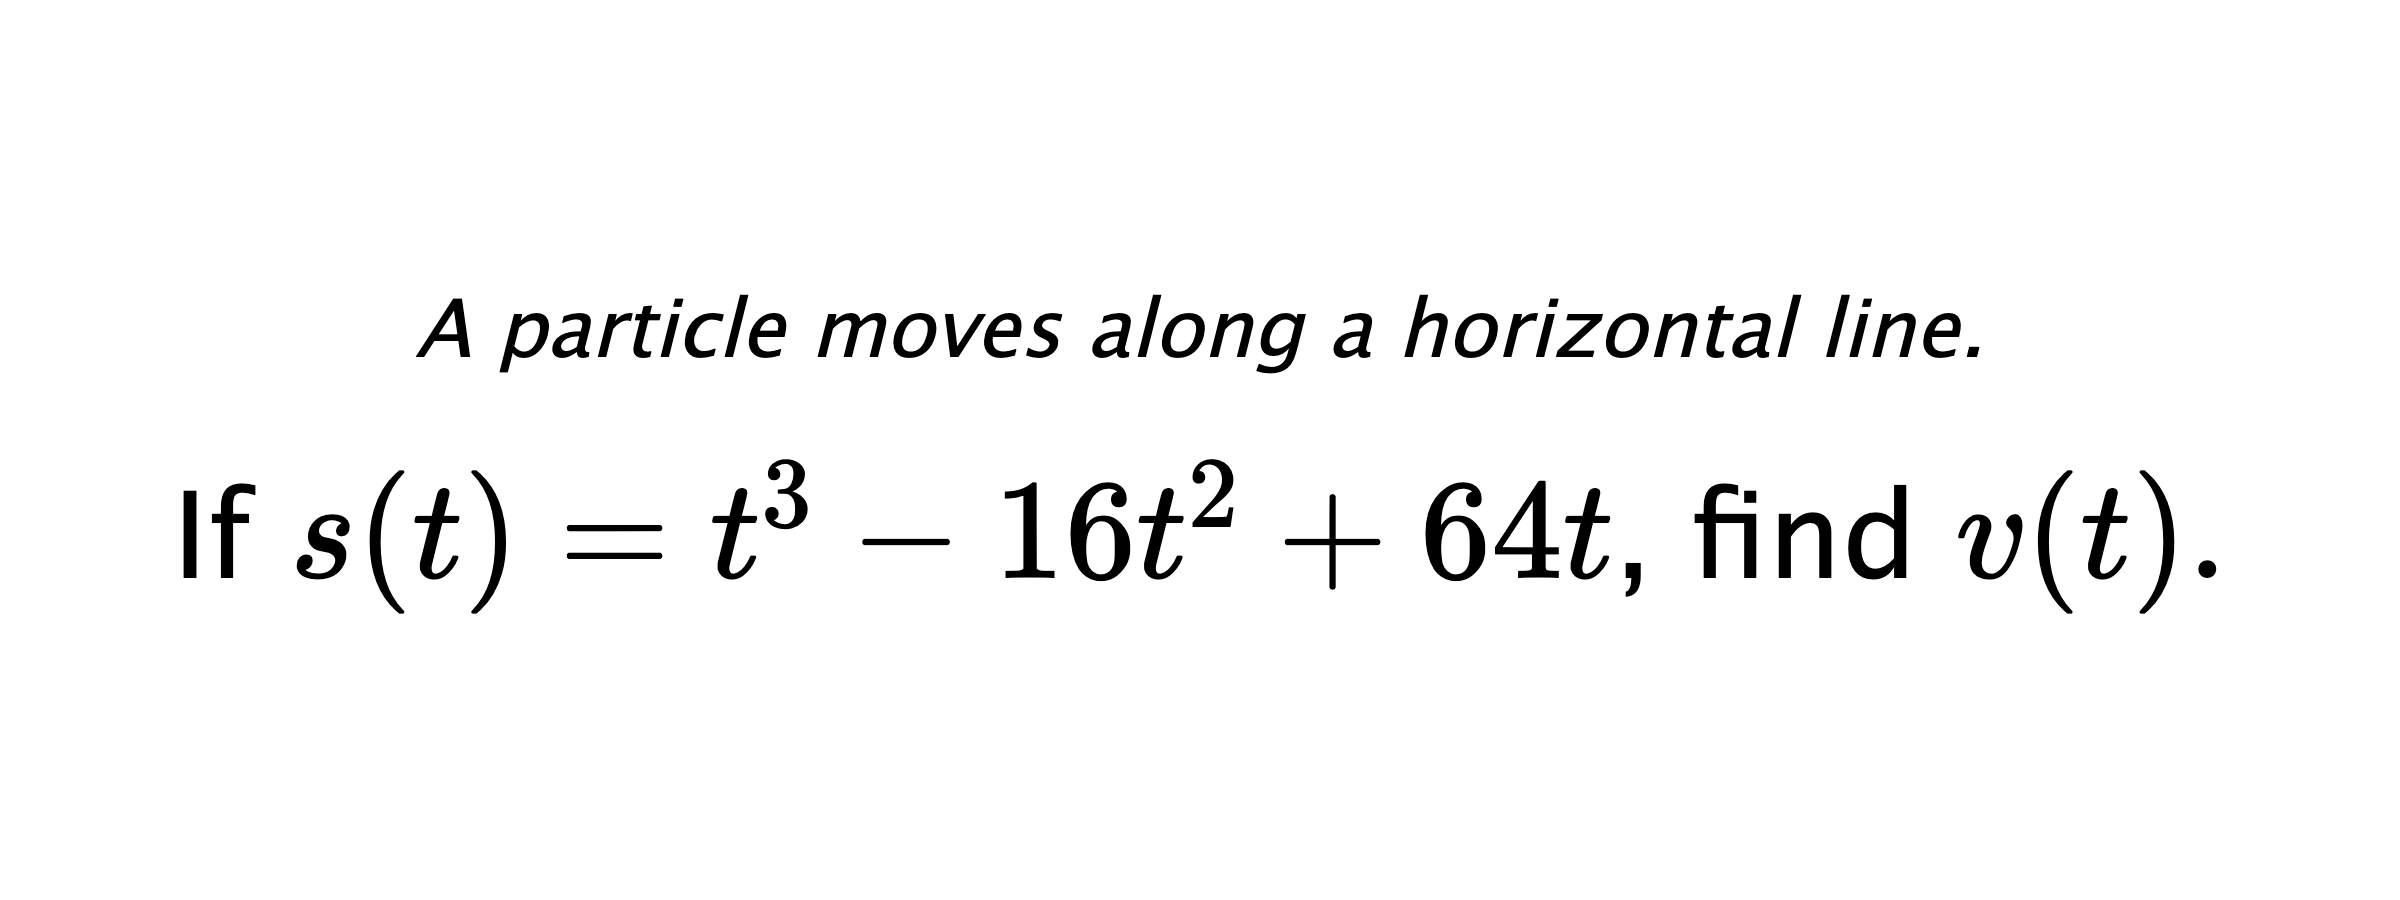 A particle moves along a horizontal line. If $ s(t)=t^3-16t^2+64t $, find $ v(t). $